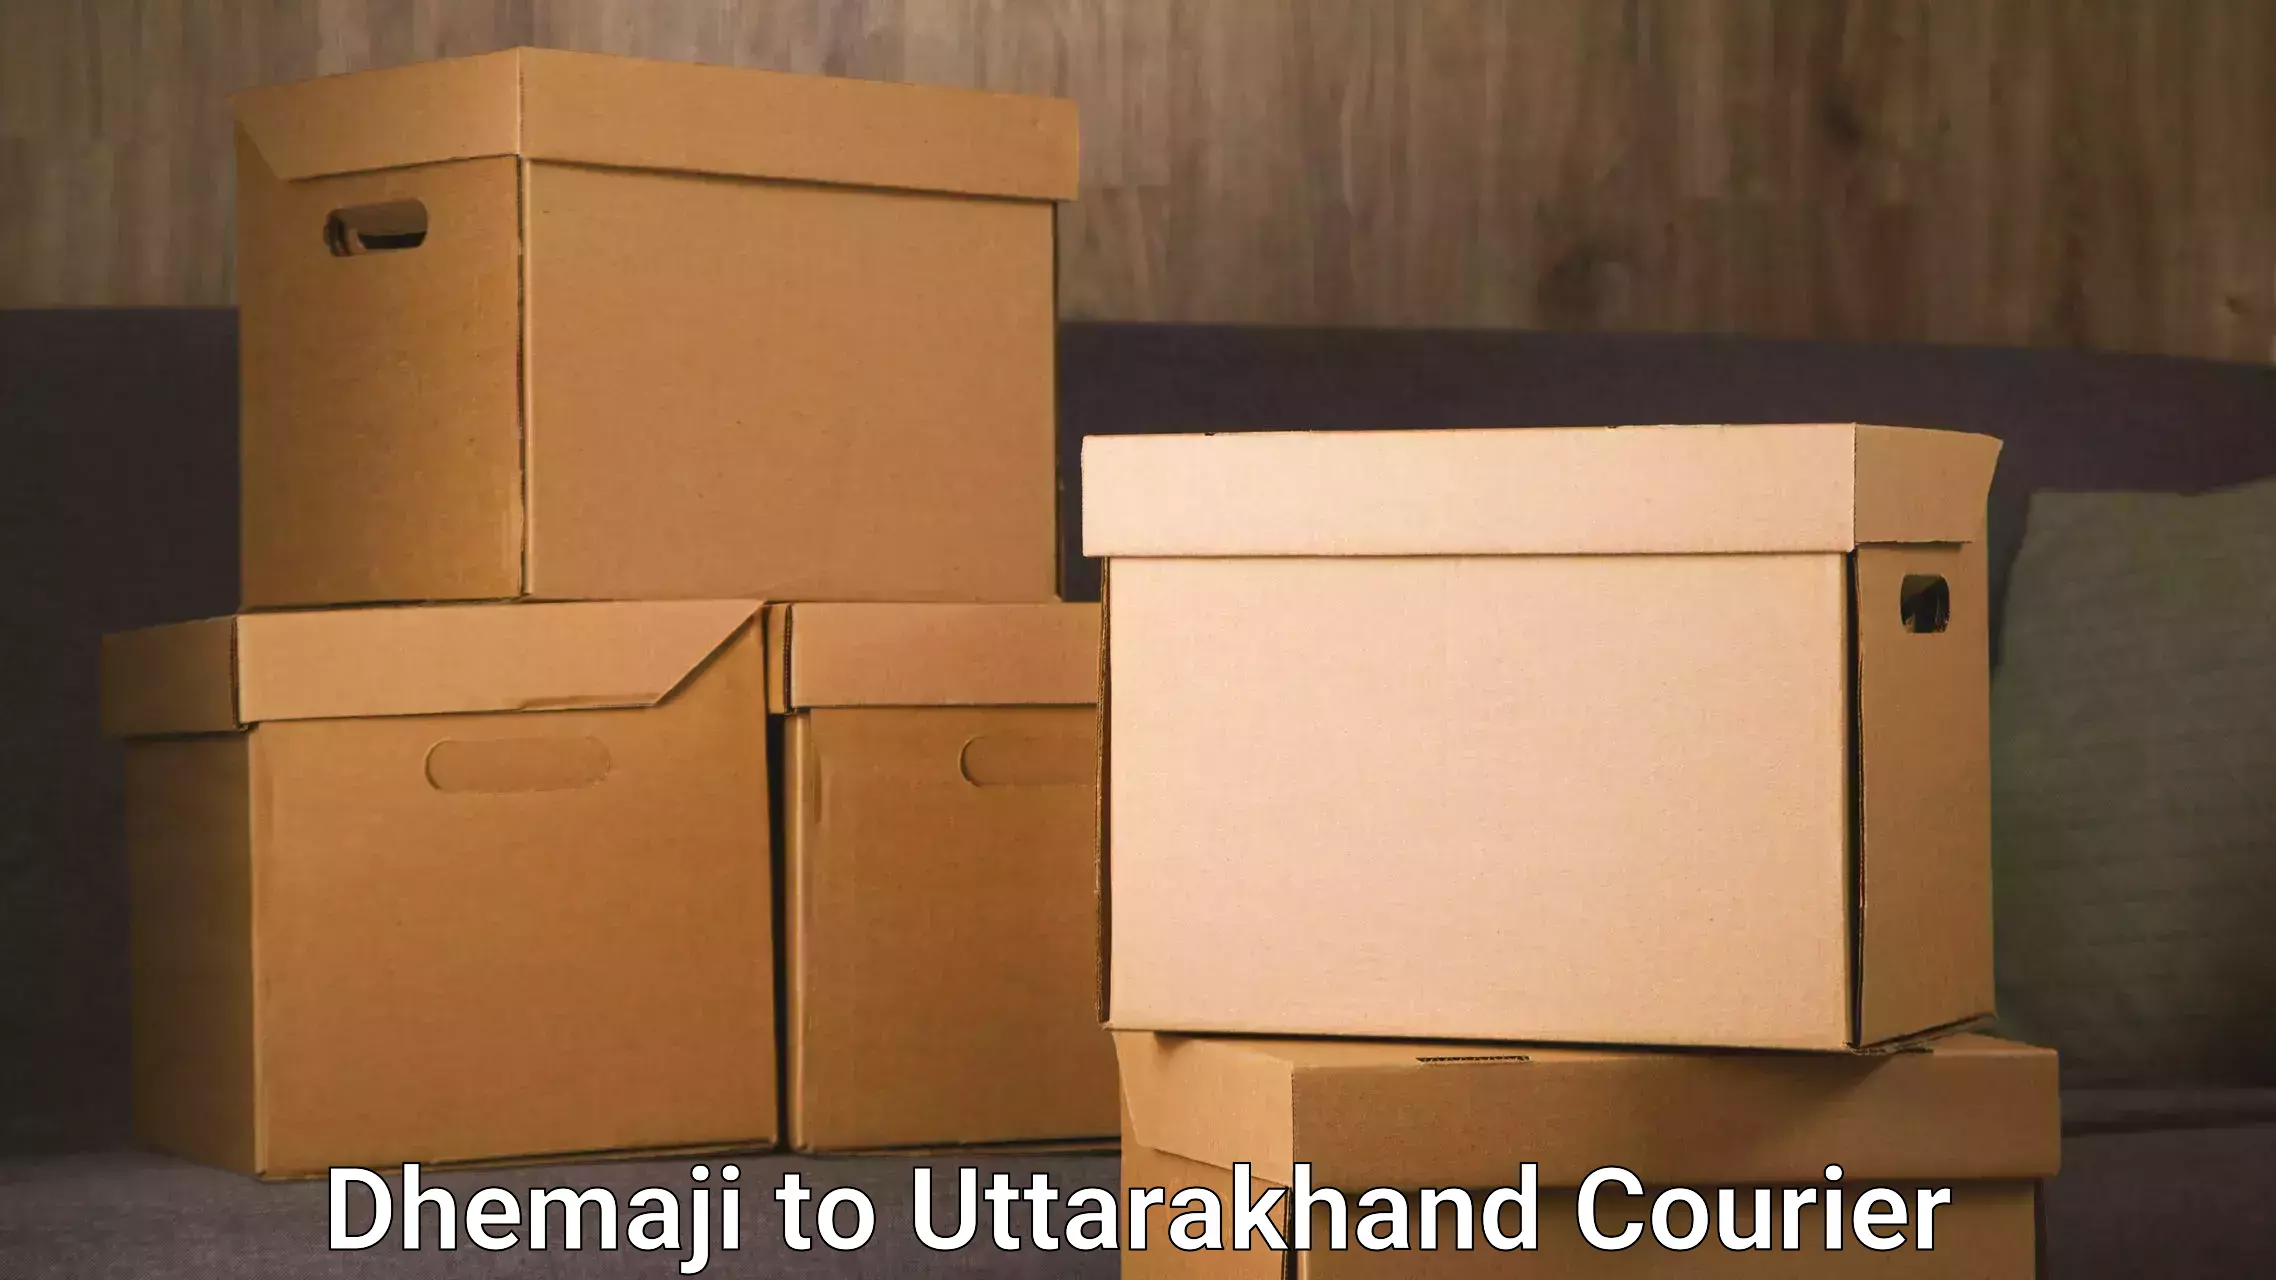 State-of-the-art courier technology Dhemaji to Dehradun